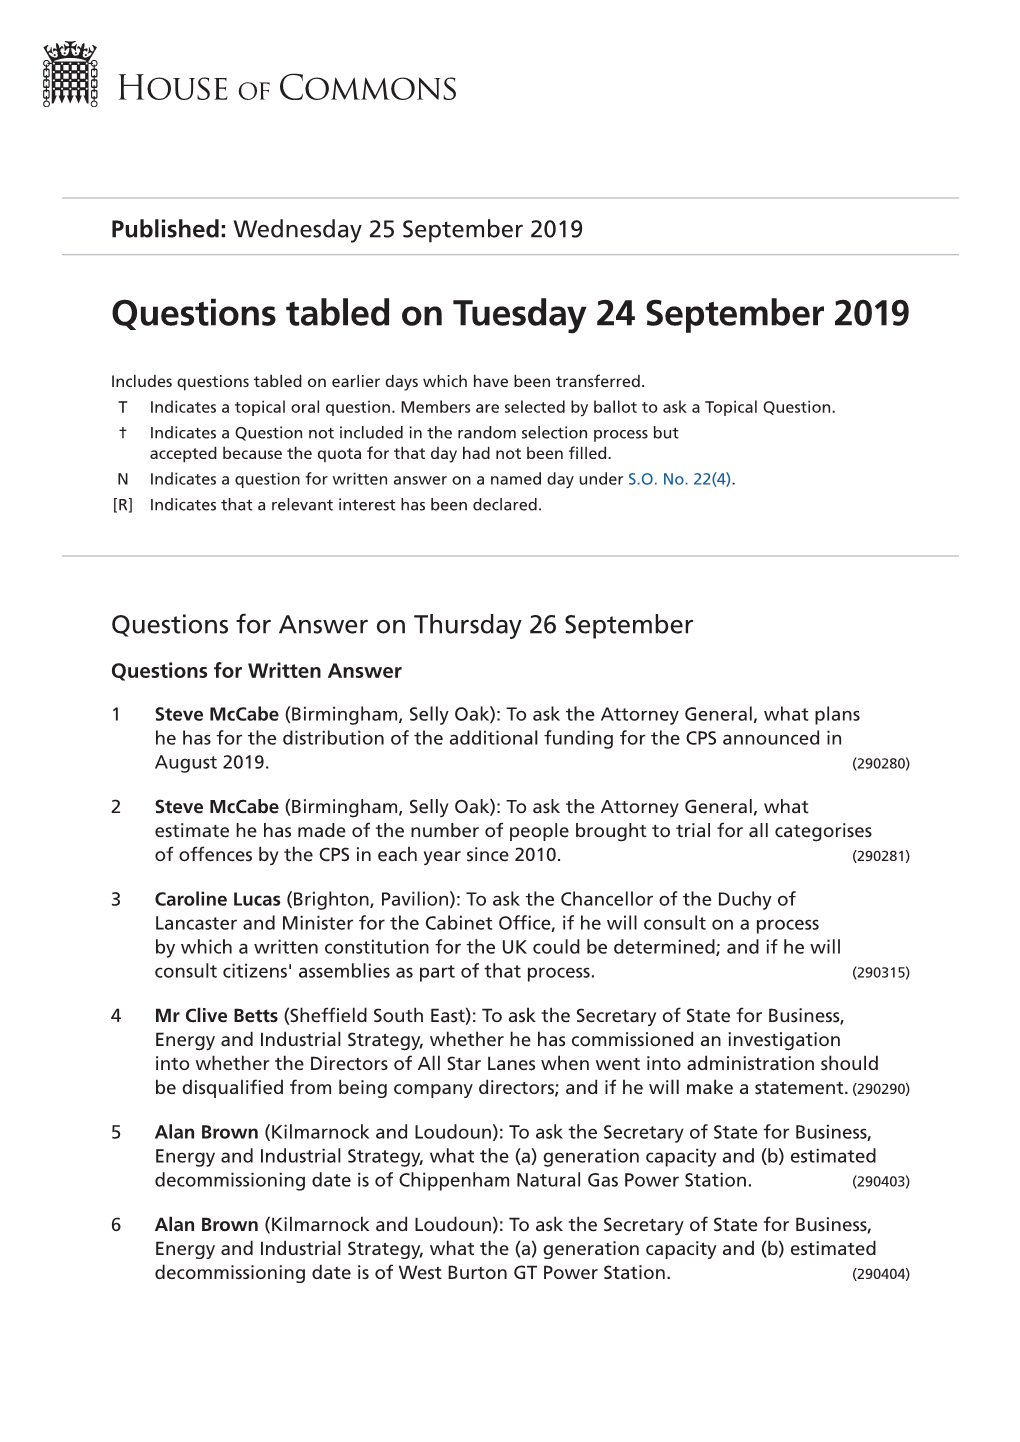 Questions Tabled on Tue 24 Sep 2019